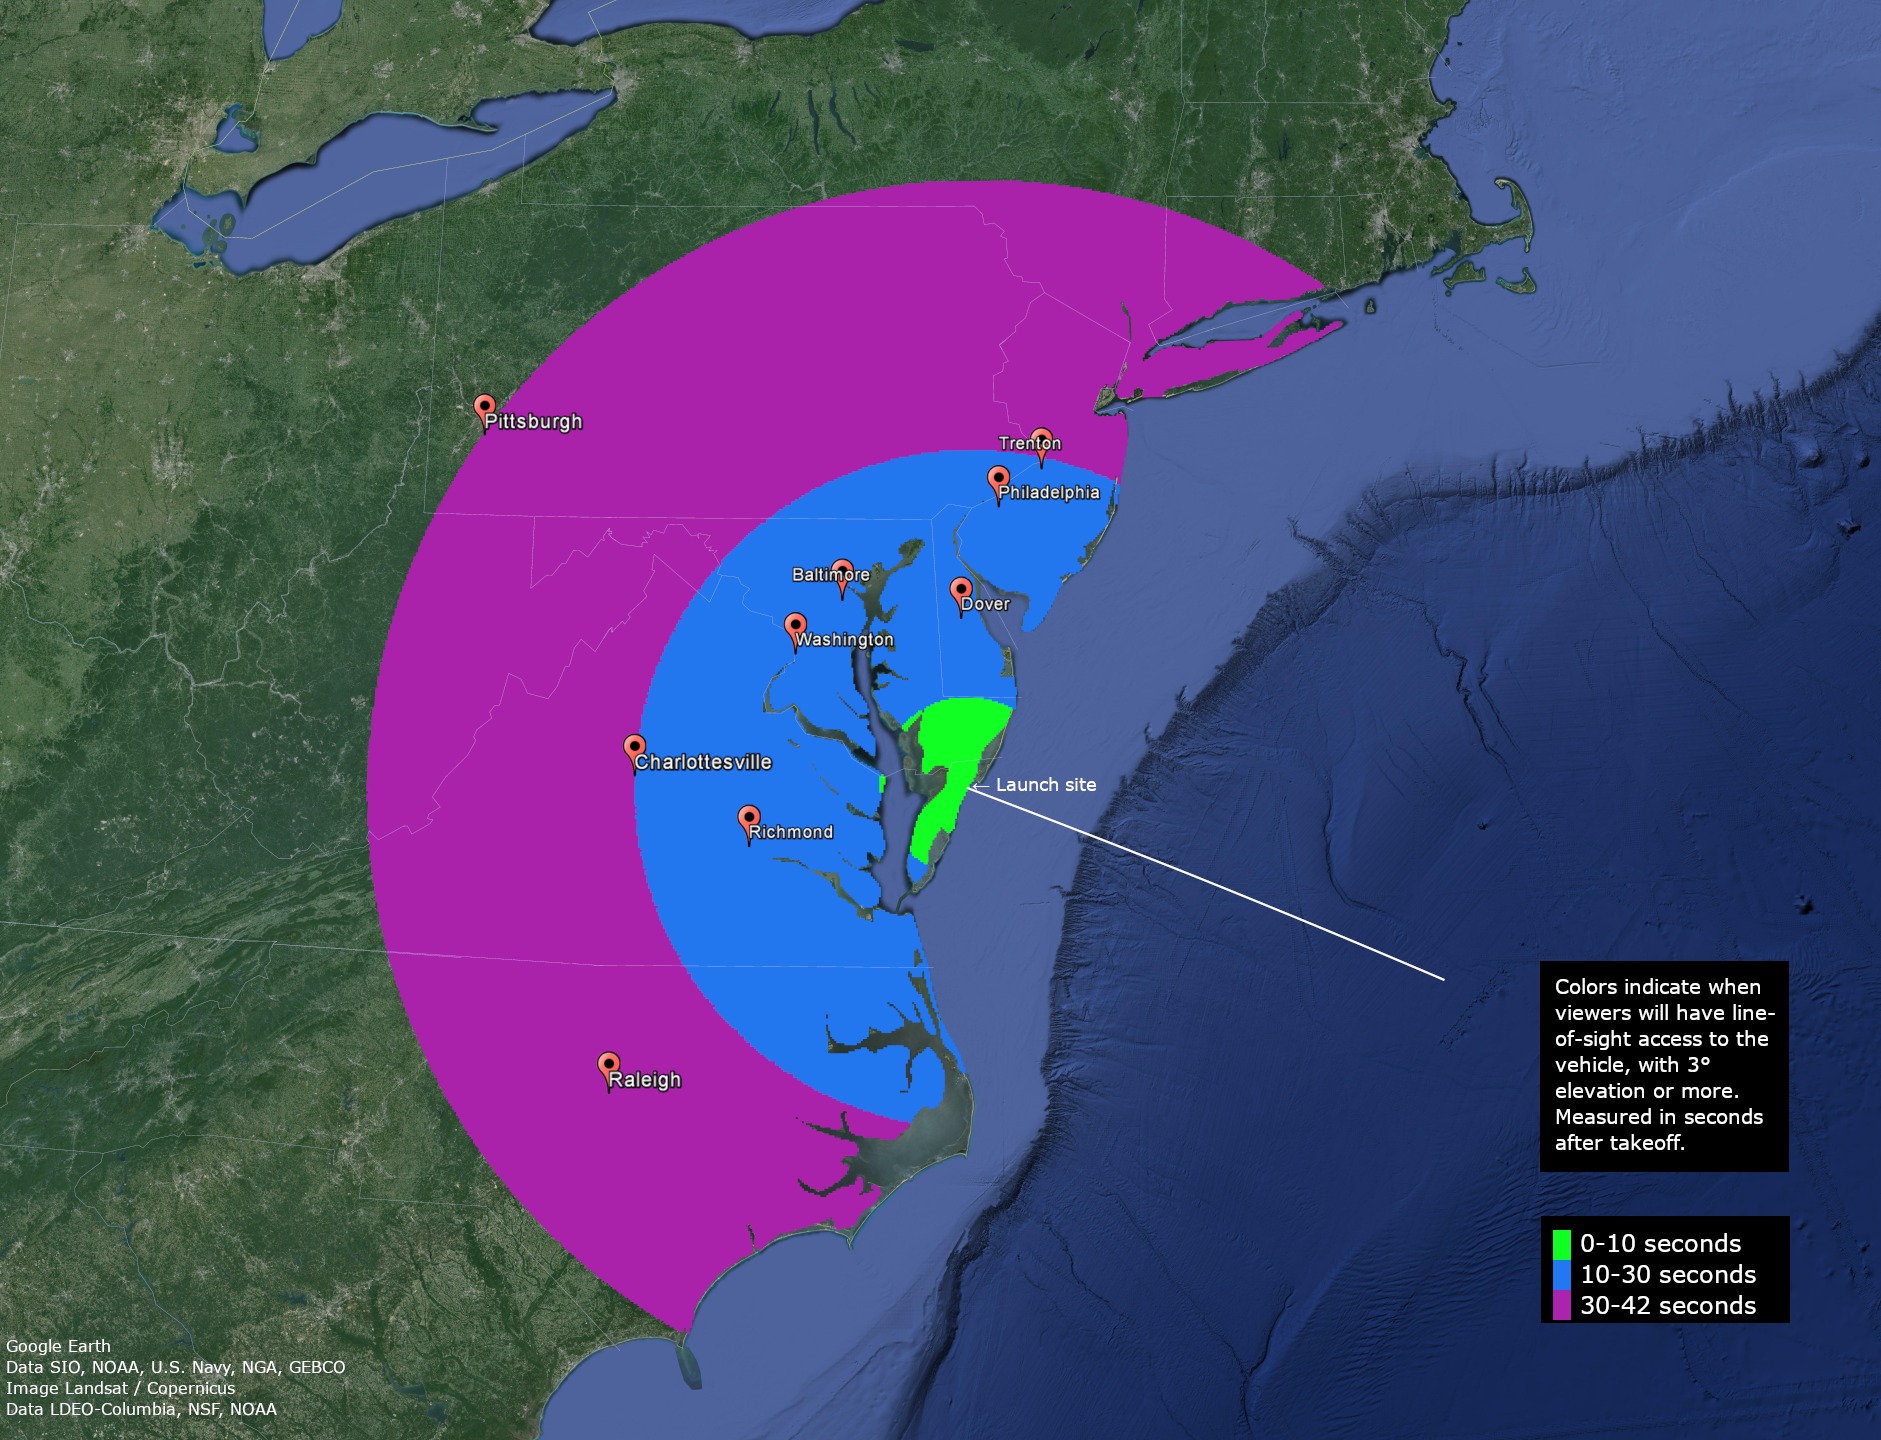 A visibility map showing the mid-Atlantic region. The map shows how many seconds after that people in the area may be able to see the Black Brant IX sounding rocket in the sky.  The land is green and the ocean is dark blue. Visibility of 30-42 seconds is represented by a bright pink semi-circile reaching up to eastern Massachusetts, through most of Pennsylvania, through eastern West Virginia, Virginia and North Carolina. Visibility area for viewers with a line-of-sight 10-30 seconds after launch is a blue semi-circle reaching from middle of New Jersey down to north North Carolina and inland to Virginia. Visibility from 0-10 seconds is indicated by a bright green semi-circle mostly covering to the edge of the southern border of Delaware and down into the Eastern Shore of Virginia. City labels starting north at Trenton, Philadelphia, Dover, Baltimore, Washington, Pittsburgh, Charlottesville, Richmond, and Raleigh. On the right is a black box with white words: 